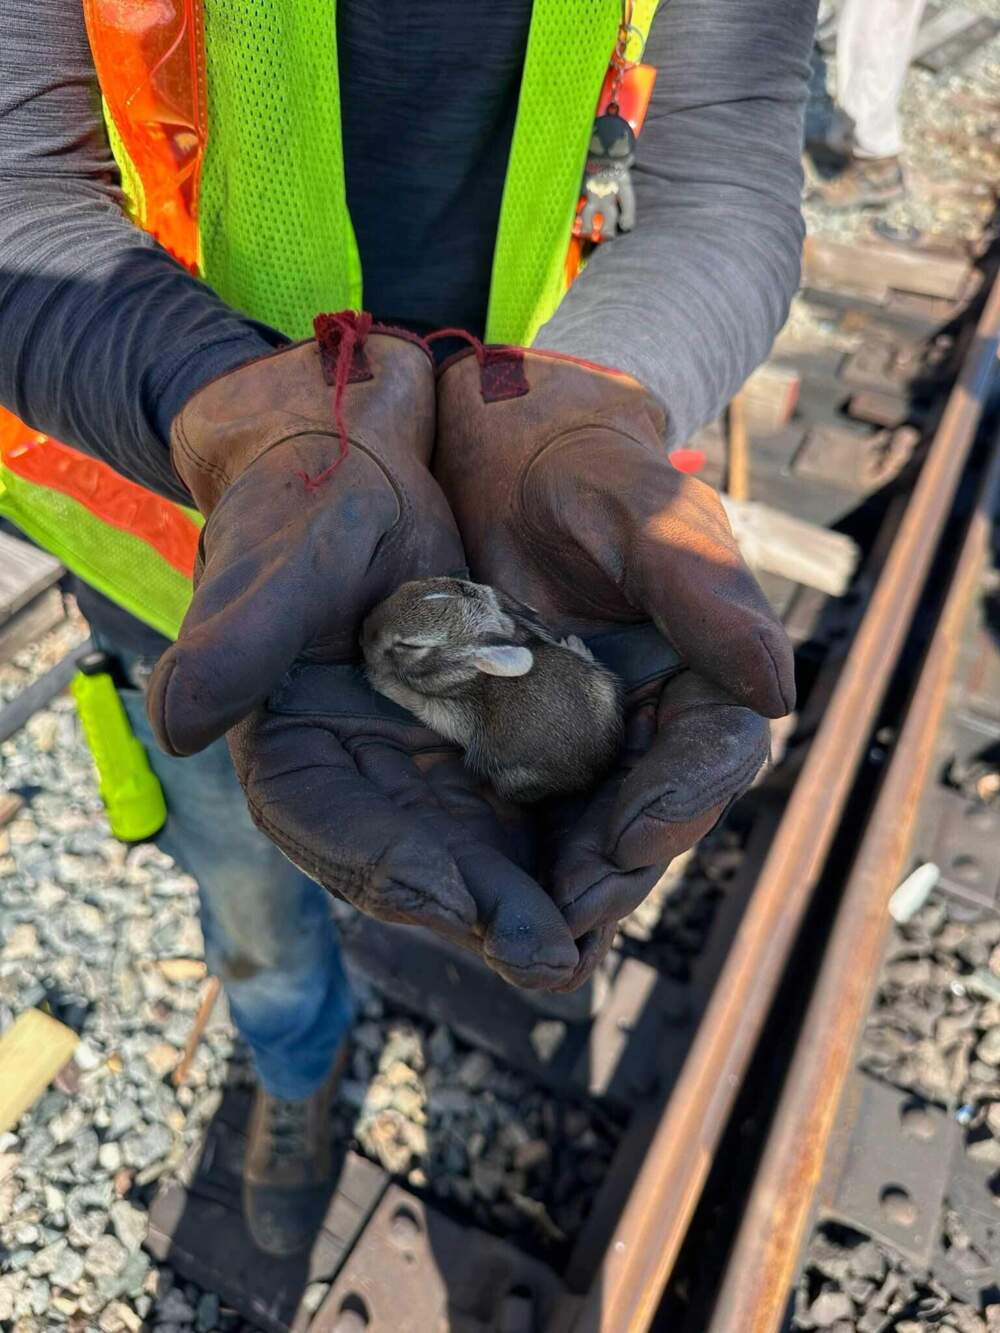 A rabbit that was rescued near Blue Line tracks earlier this week. (Courtesy photo MBTA)